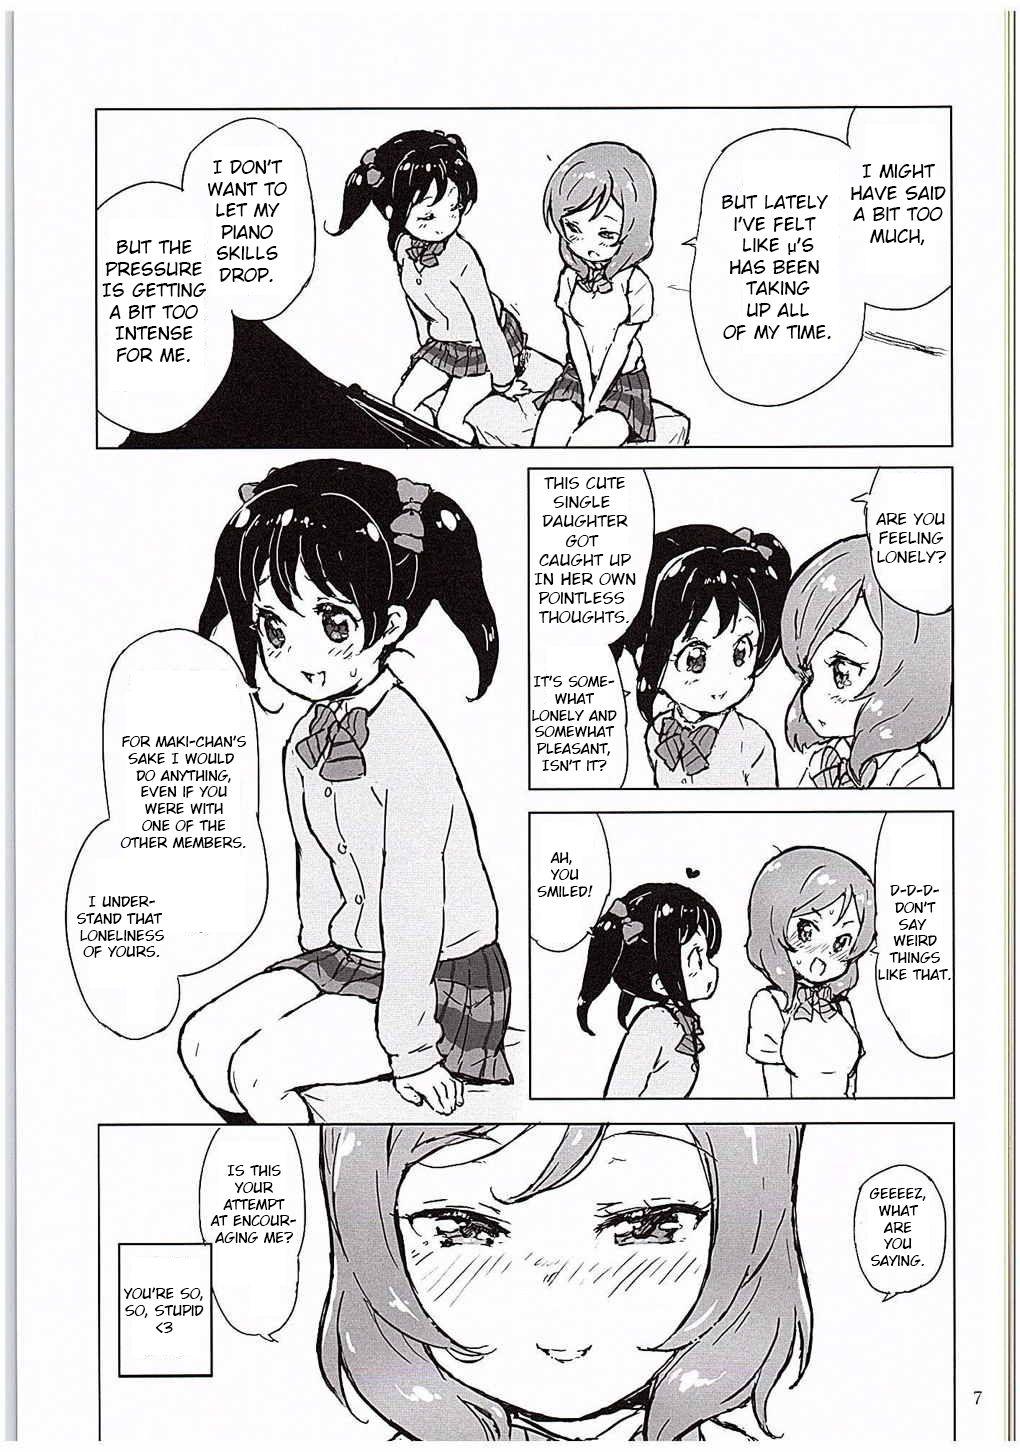 Curious Ongakushitsu no Koibito-tachi | Lovers in the Music Room - Love live Grandmother - Page 6